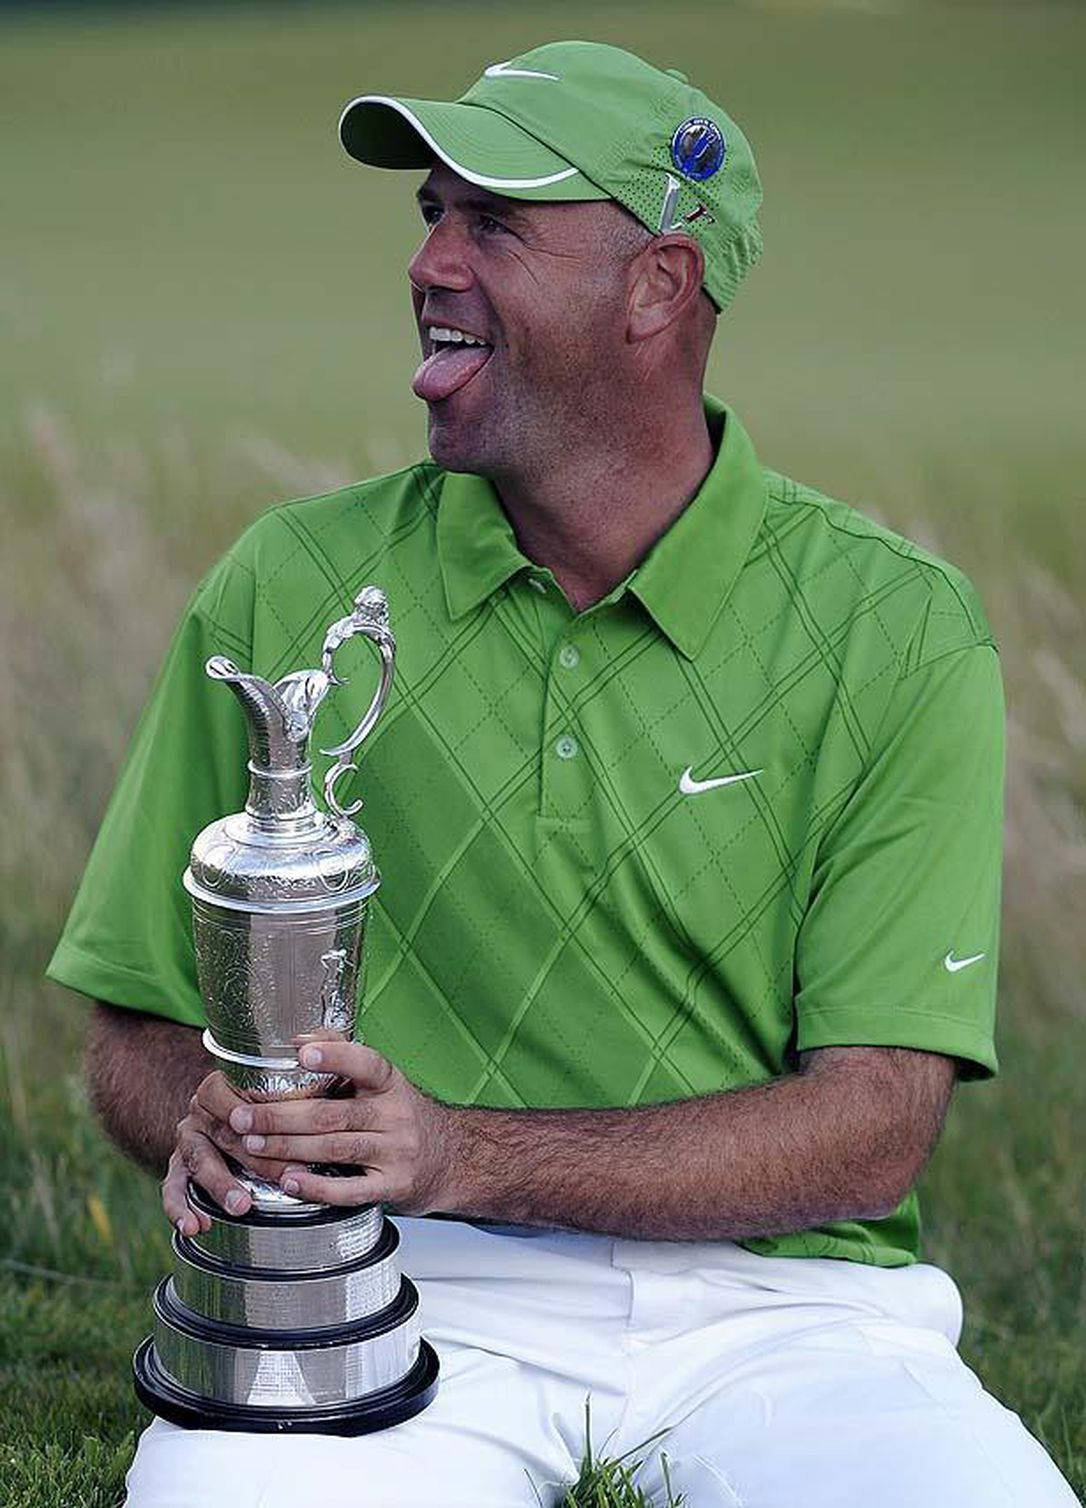 Stewartcink Gör En Rolig Min - (could Be Used As A Caption For A Wallpaper Featuring Stewart Cink Making A Funny Face) Wallpaper